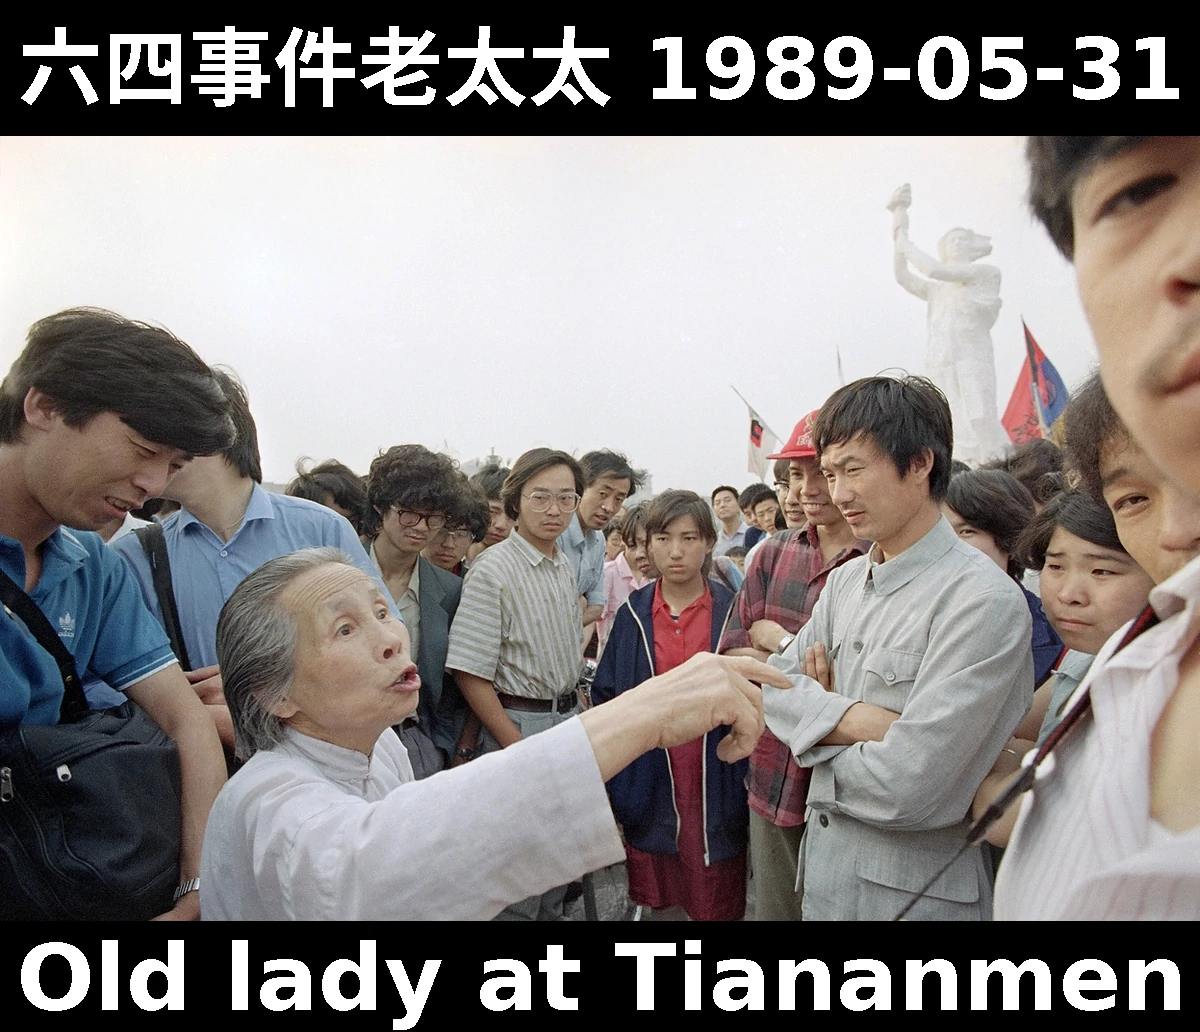 Tiananmen old lady